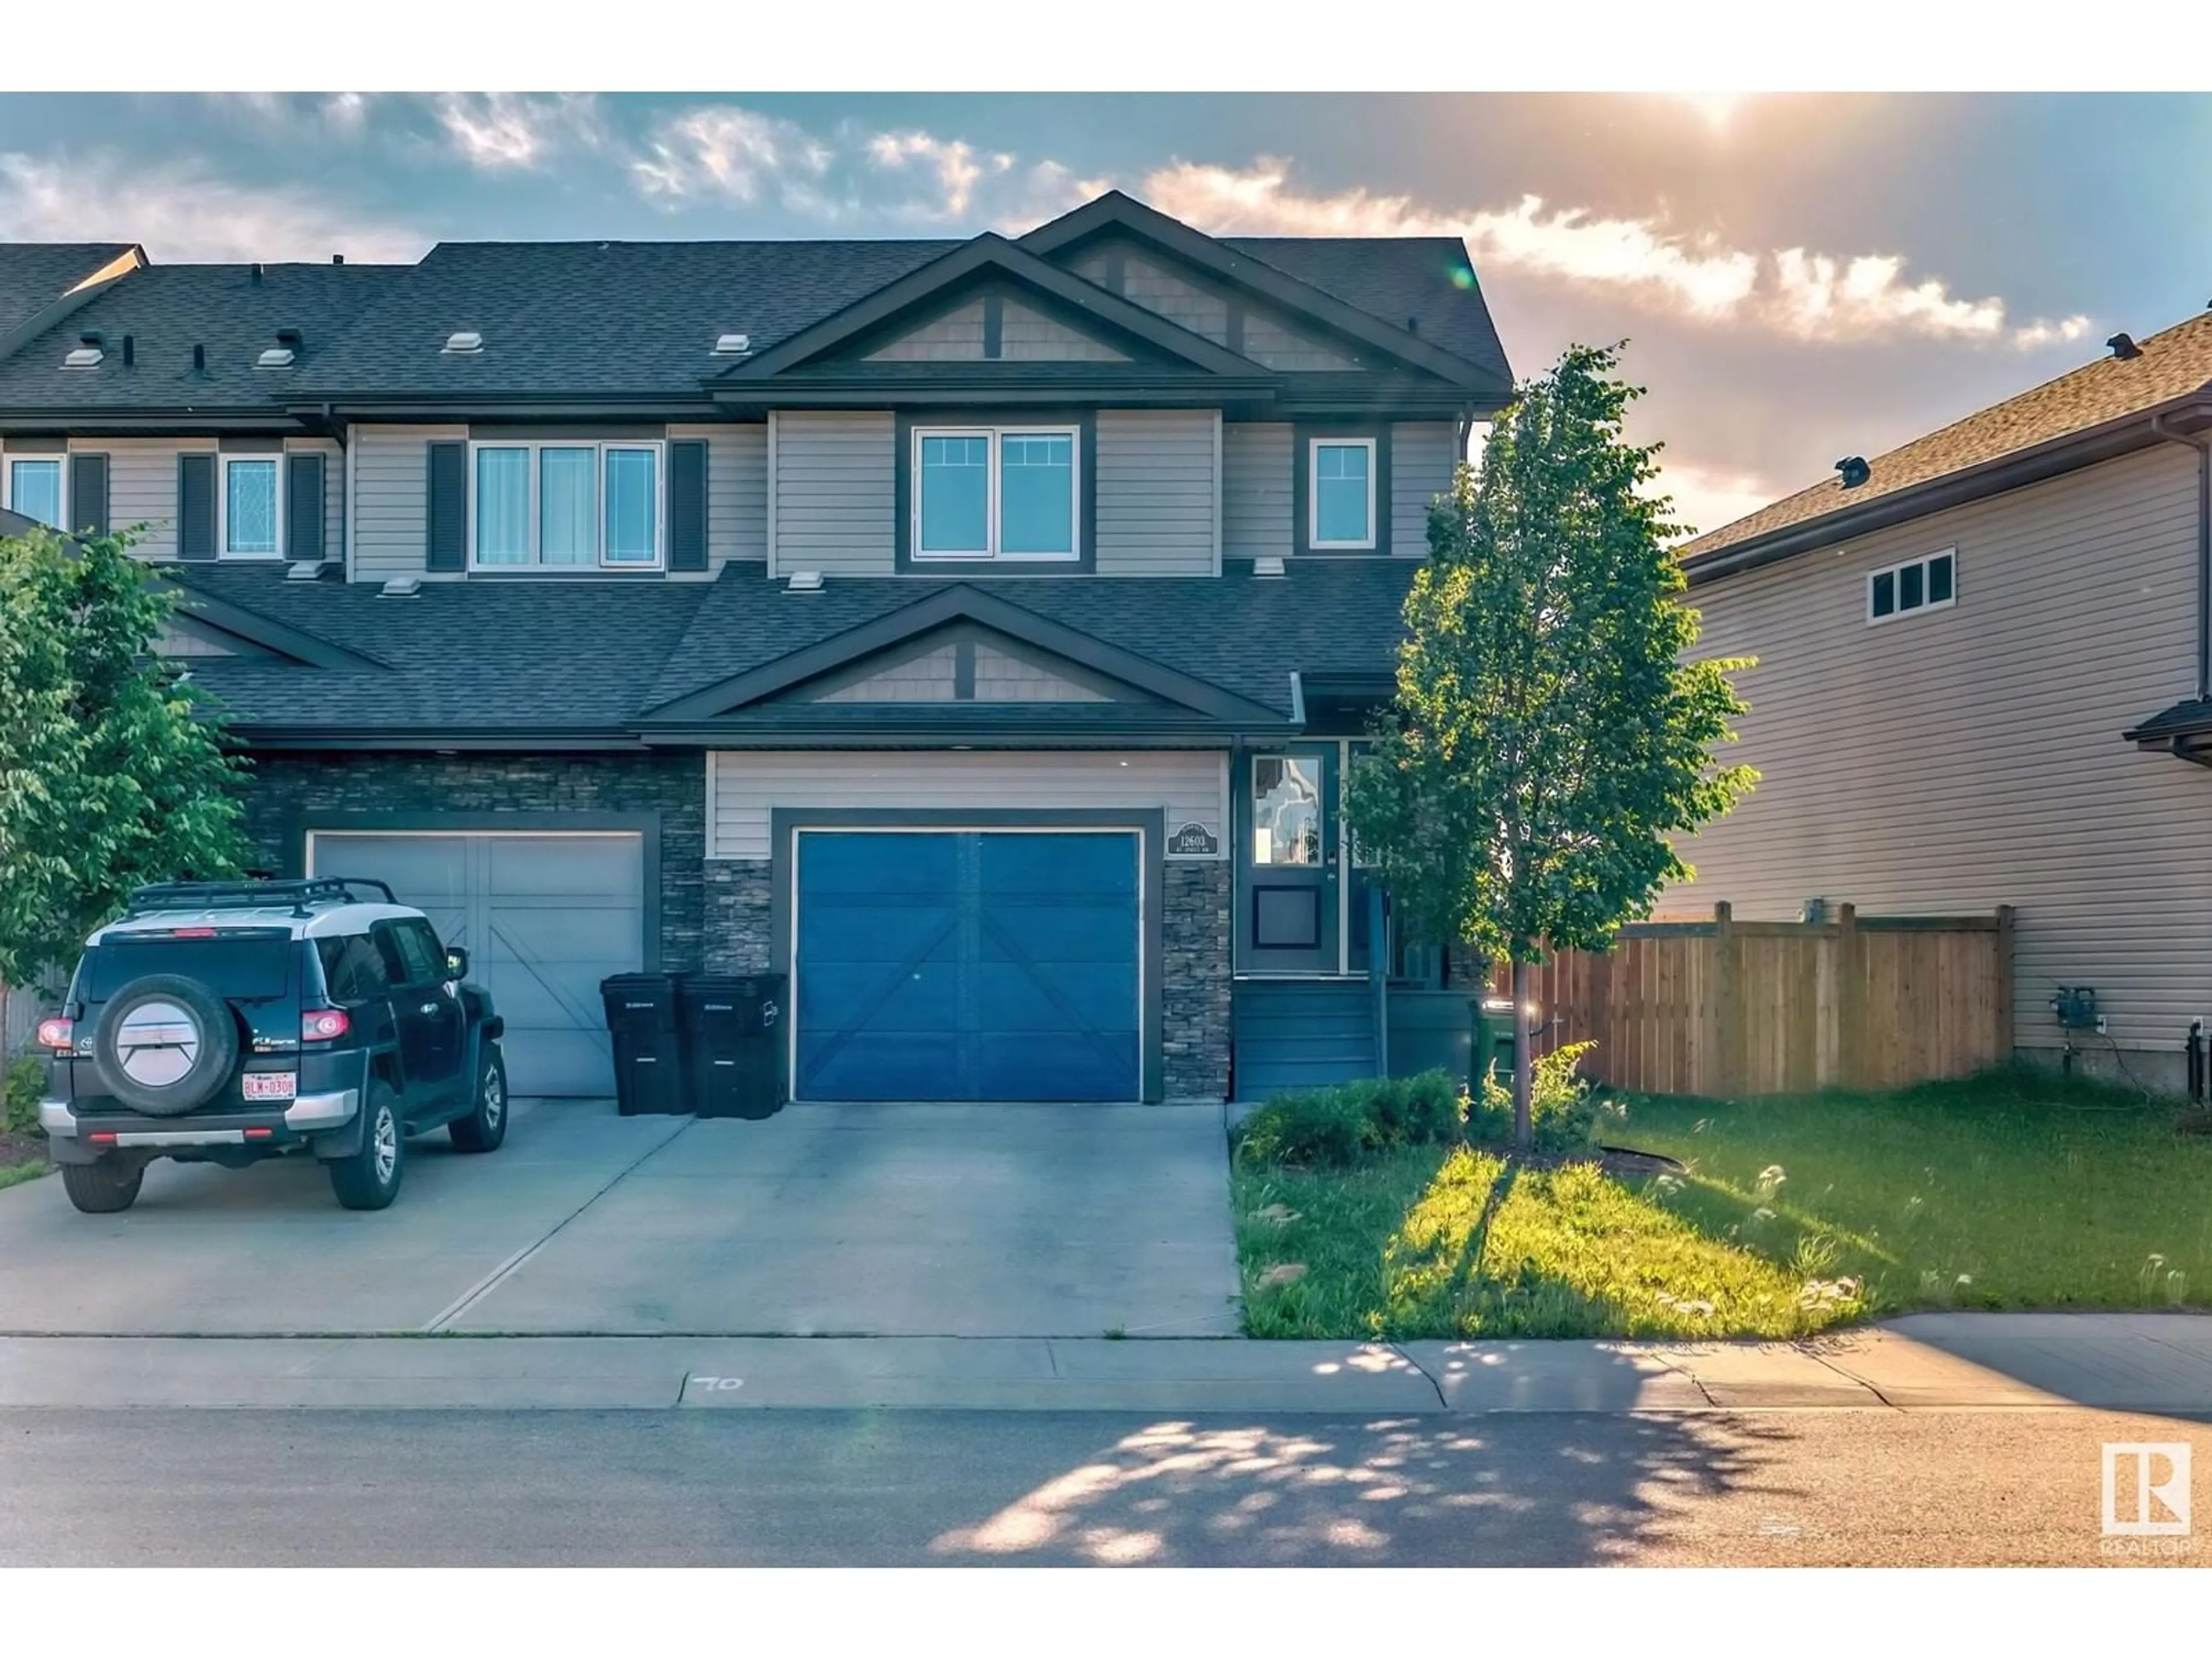 A pic from exterior of the house or condo for 12603 45 ST NW, Edmonton Alberta T5A1L3